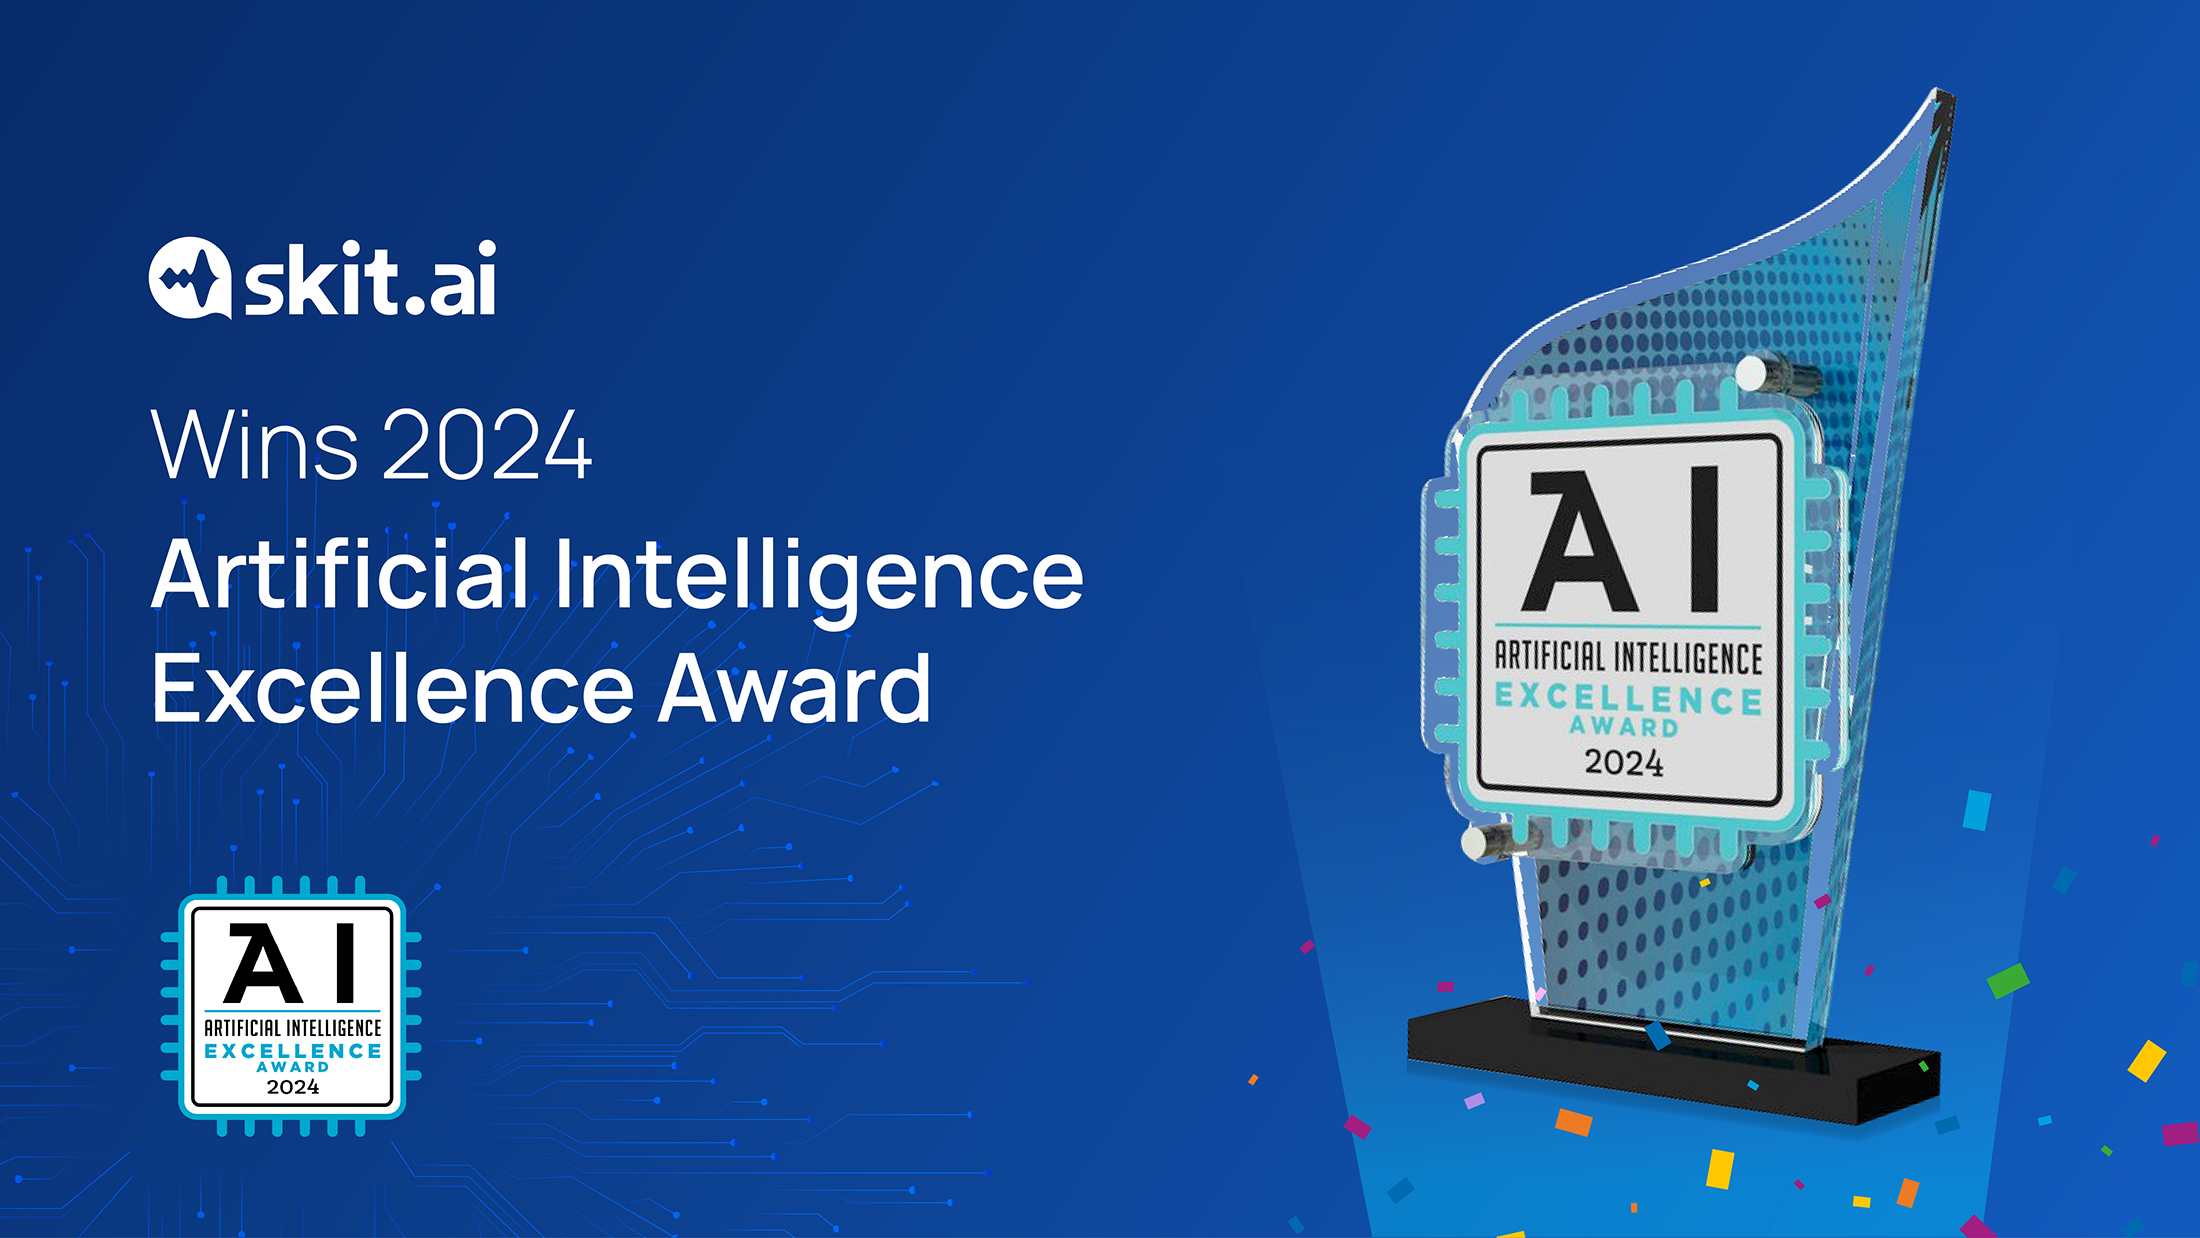 Skit.ai Wins 2024 Artificial Intelligence Excellence Award